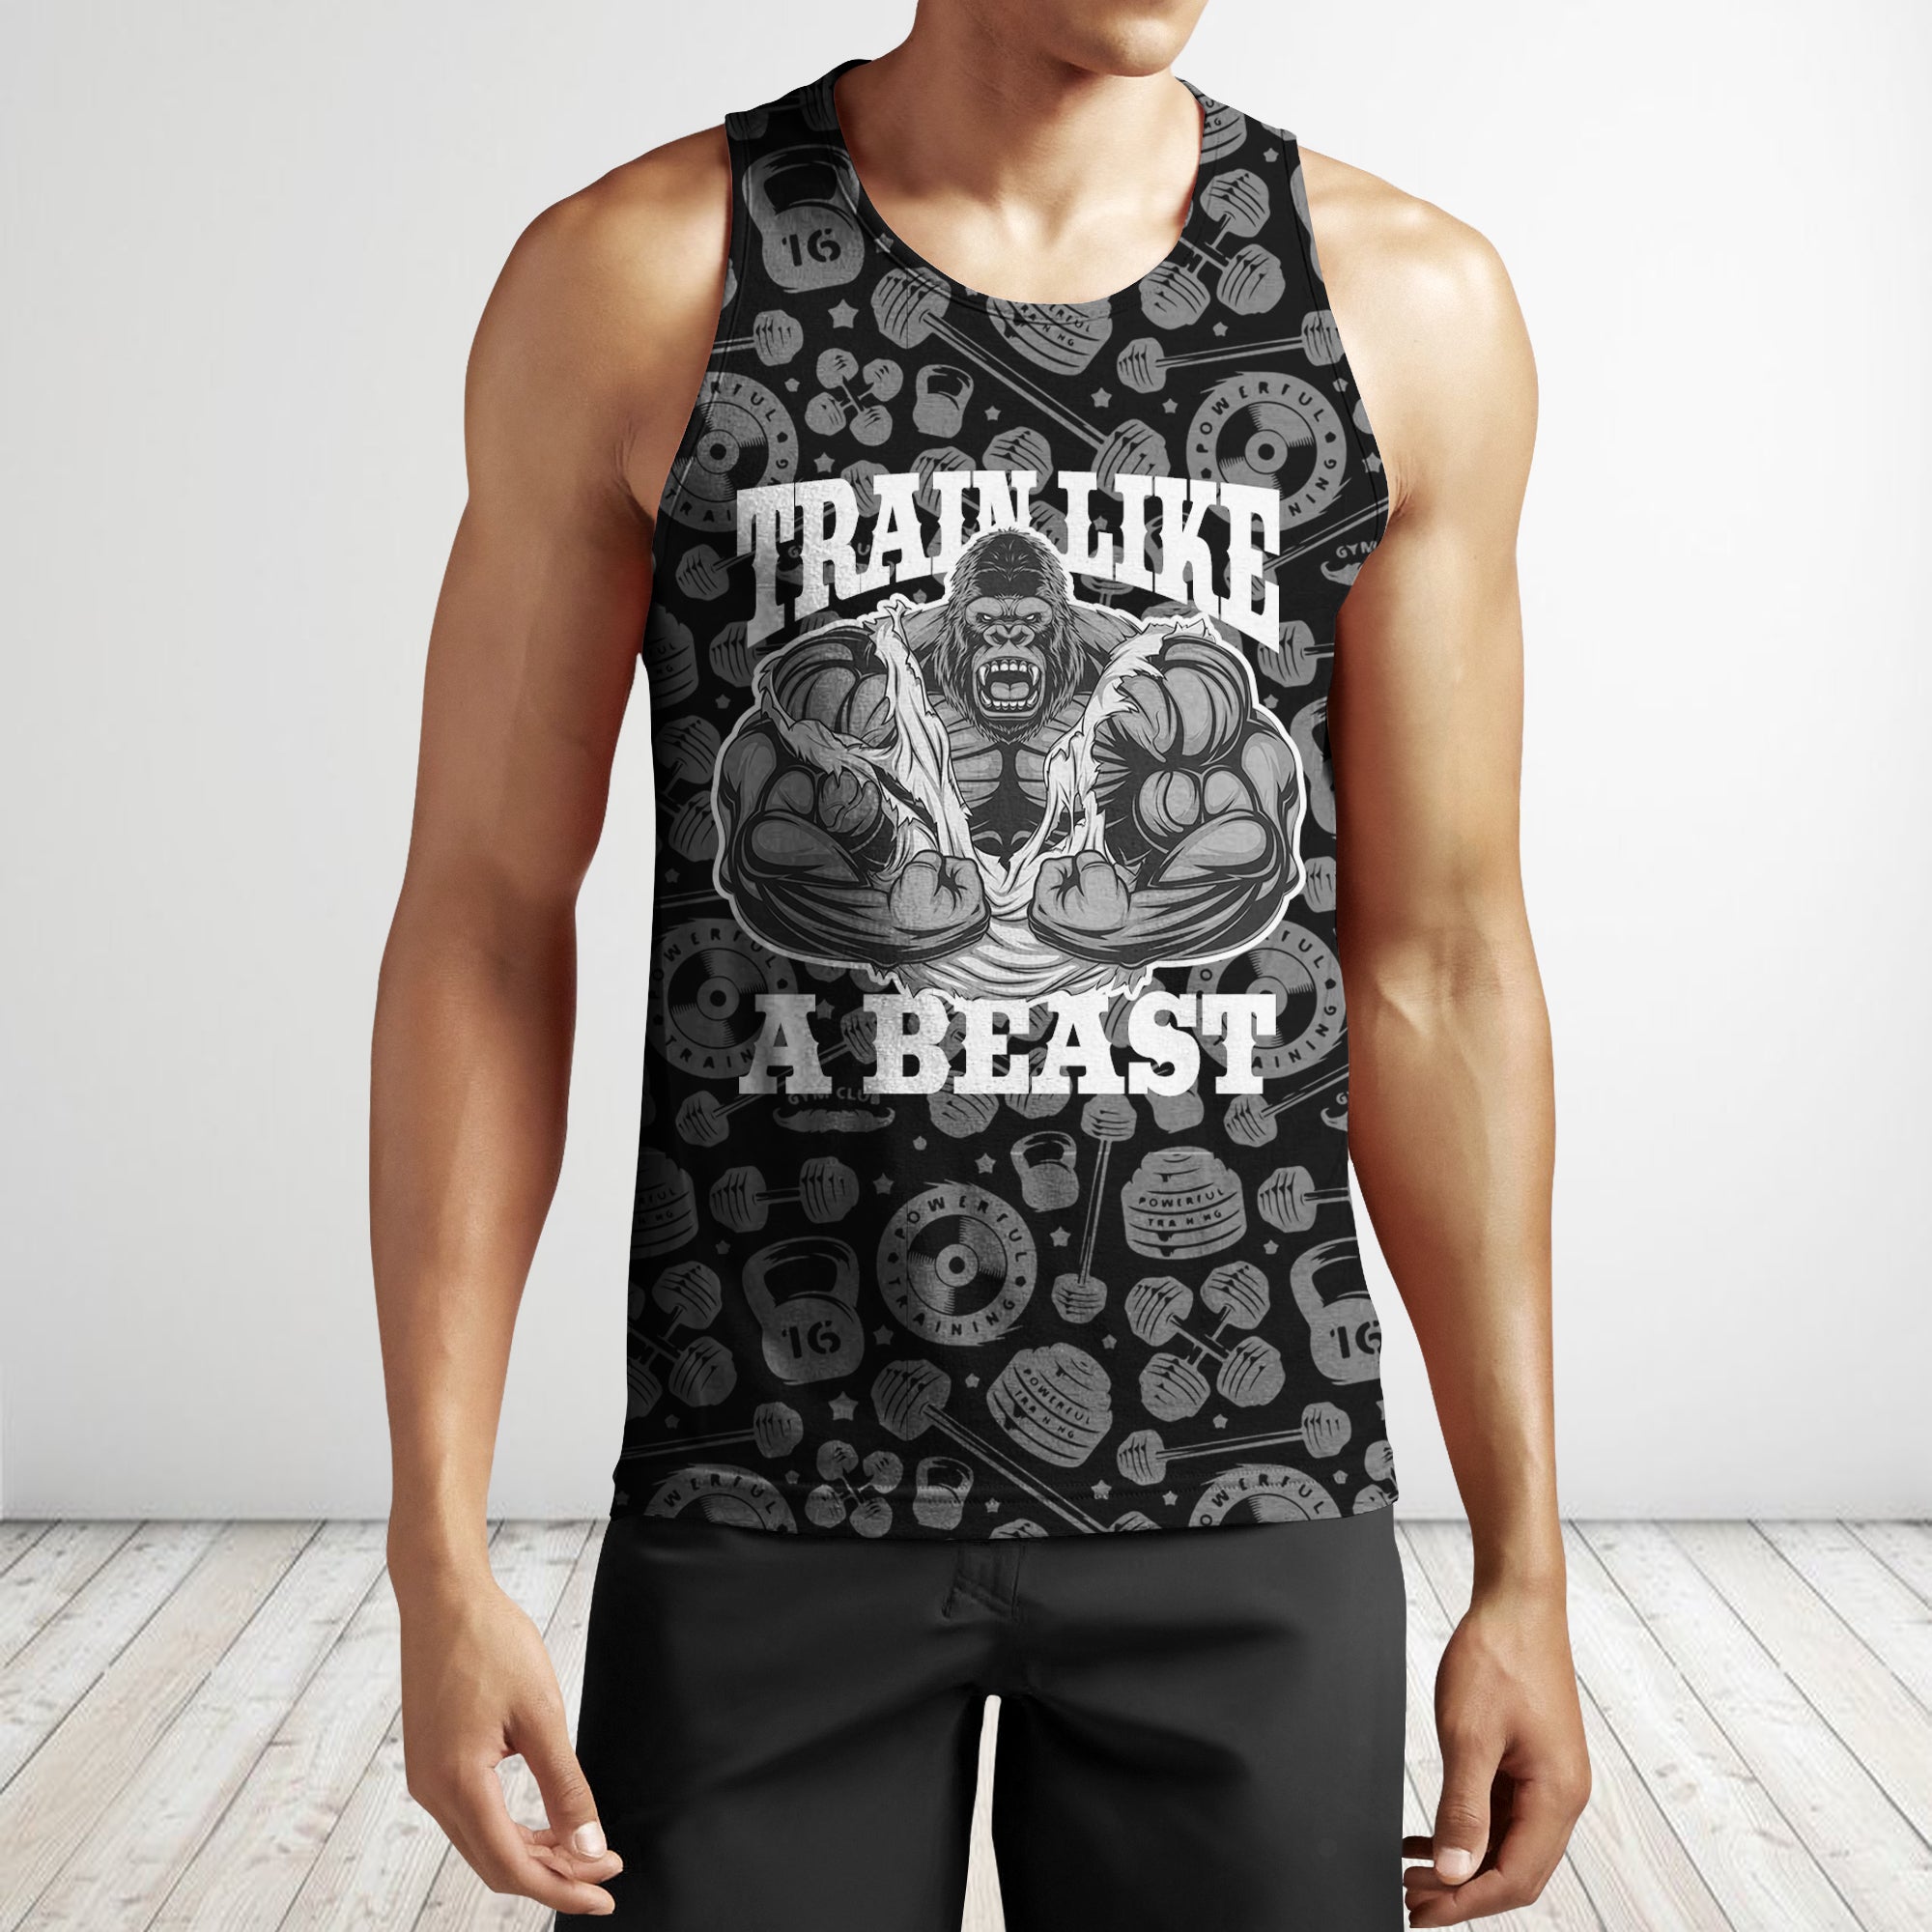 All Natural Bro Gym Fitness Workout Gifts' Men's Premium Tank Top